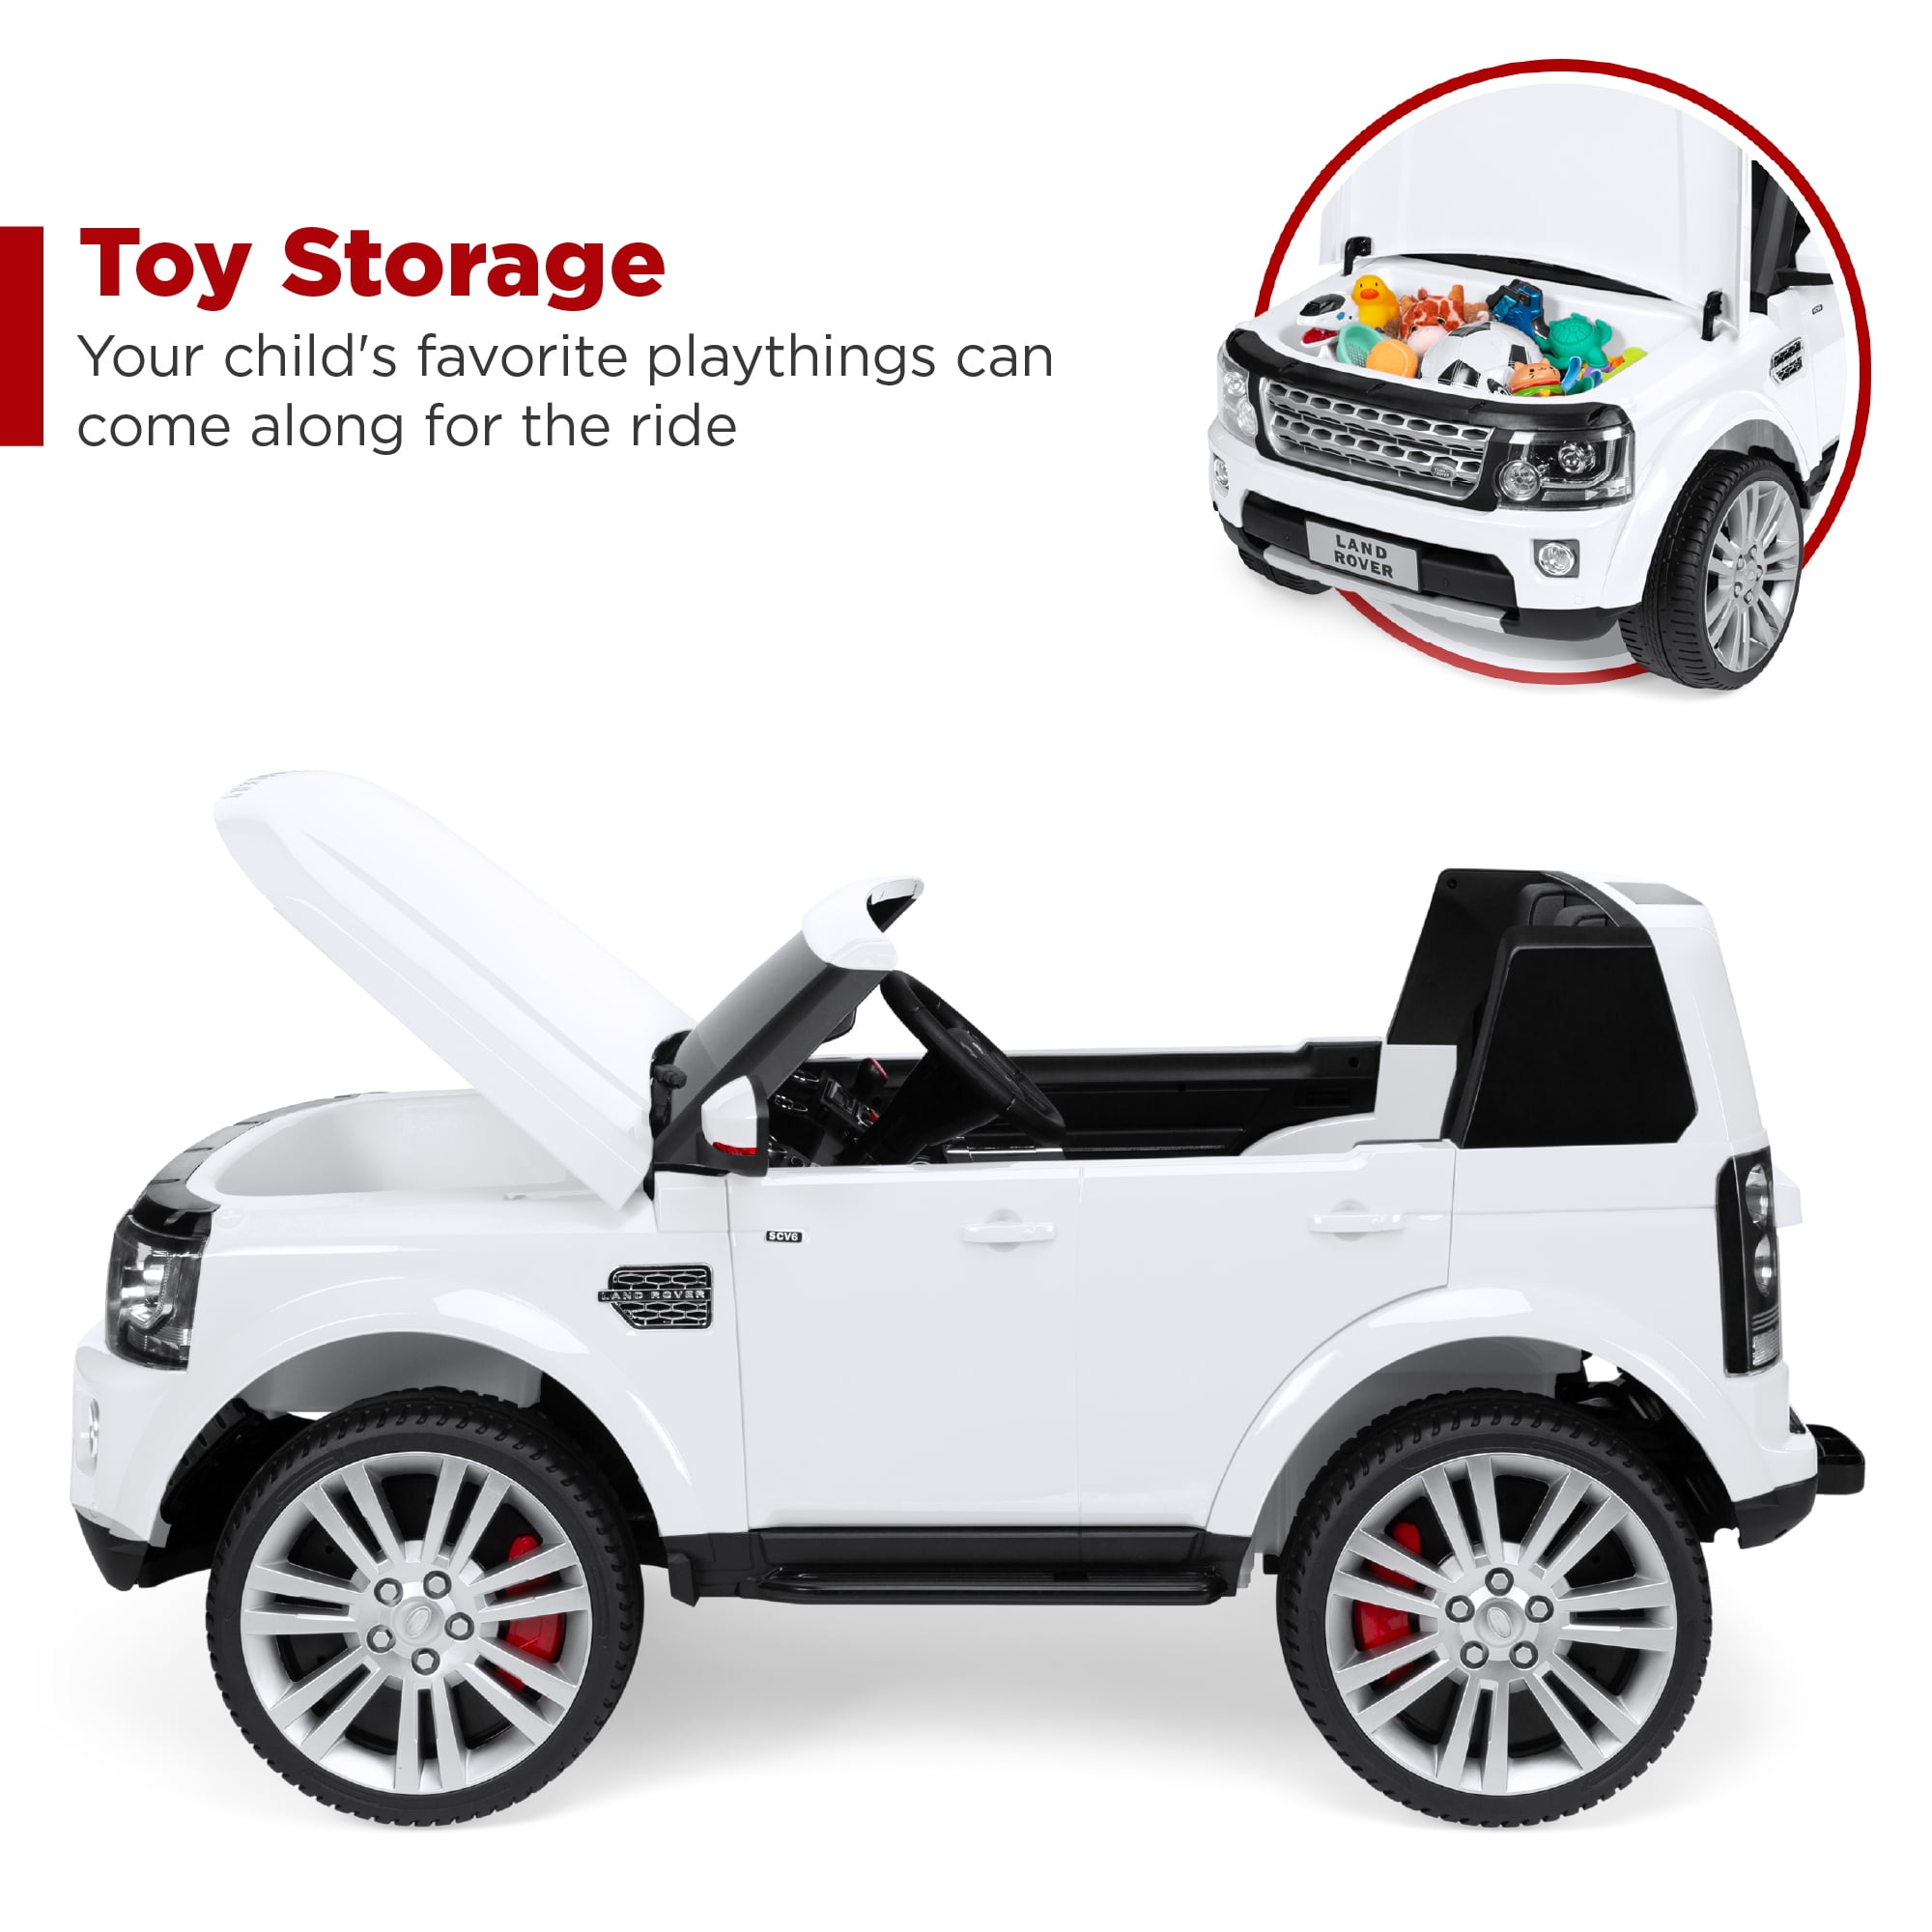 Best Choice Products 12V 3.7 MPH 2-Seater Licensed Land Rover Ride On Car Toy w/ Parent Remote Control - White - 2